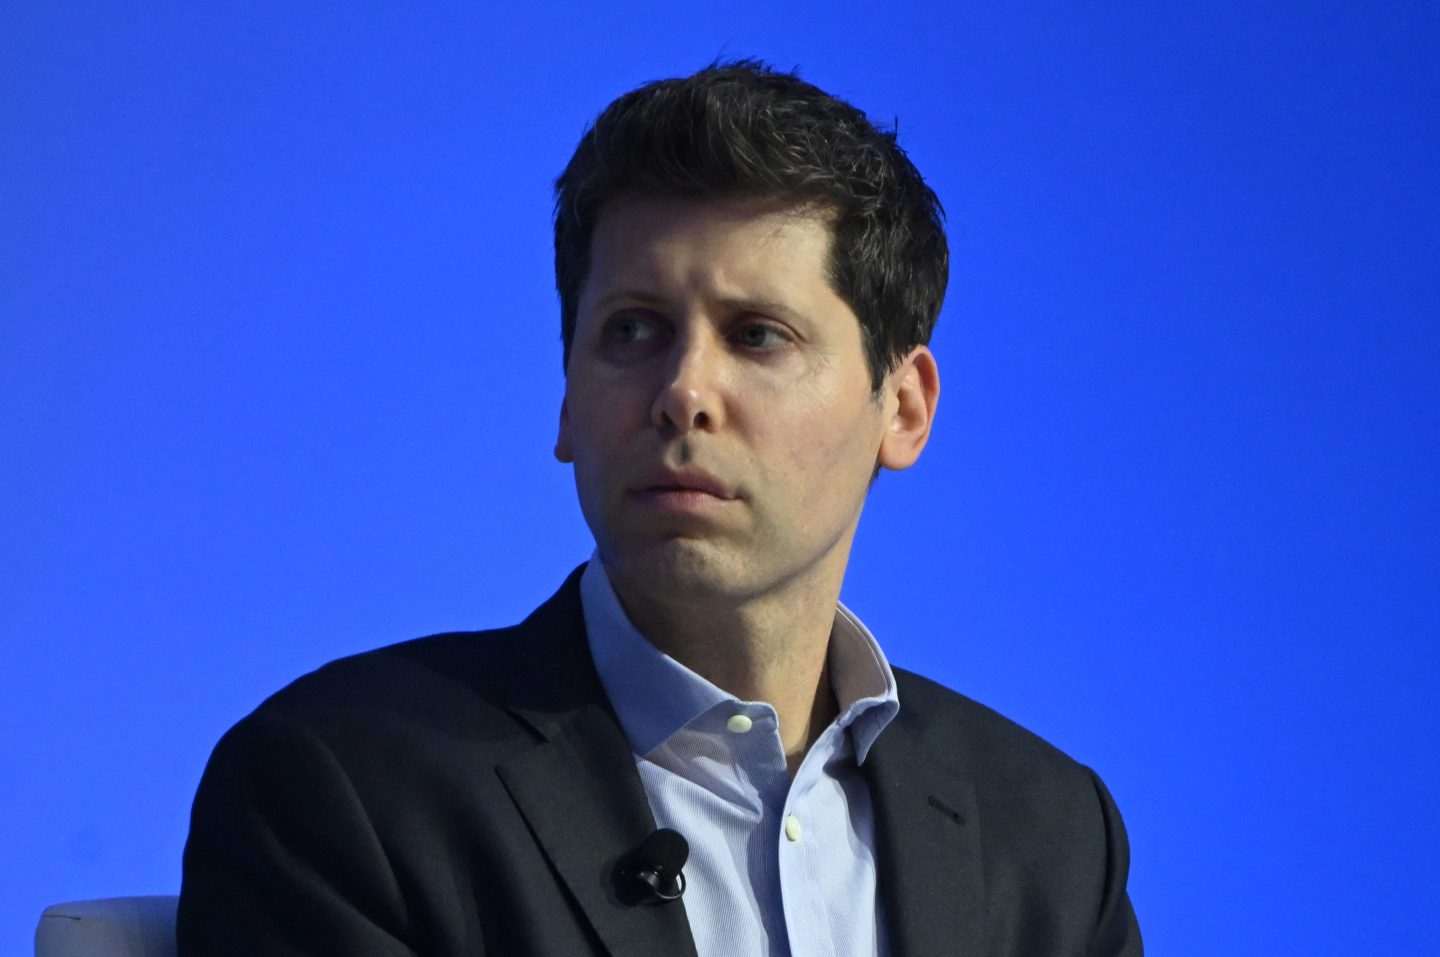 Sam Altman, CEO of OpenAI participates in the &#8220;Charting the Path Forward: The Future of Artificial Intelligence&#8221; at the Asia-Pacific Economic Cooperation (APEC) Leaders&#8217; Week in San Francisco, California, on November 16, 2023. The APEC Summit takes place through November 17. (Photo by ANDREW CABALLERO-REYNOLDS / AFP) (Photo by ANDREW CABALLERO-REYNOLDS/AFP via Getty Images)